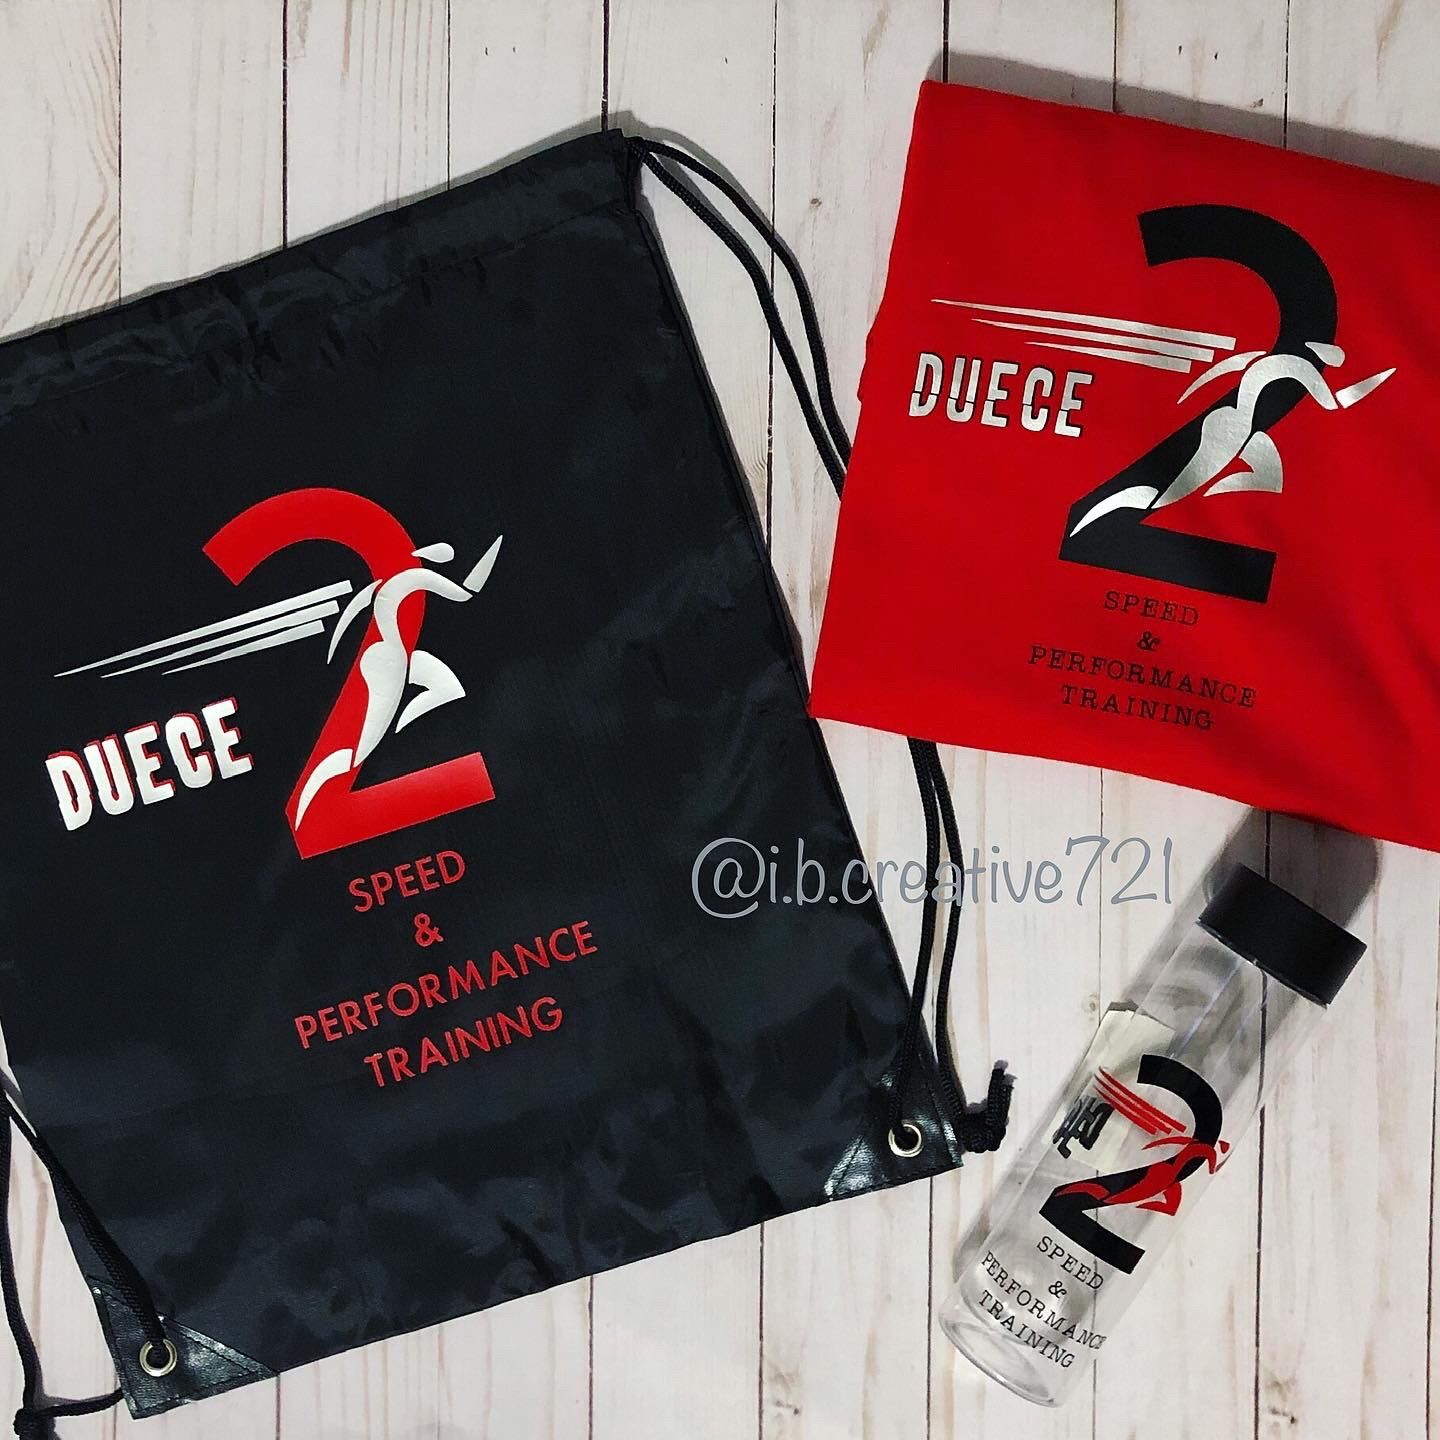 Personalized backpacks, water bottles, shirts and more!